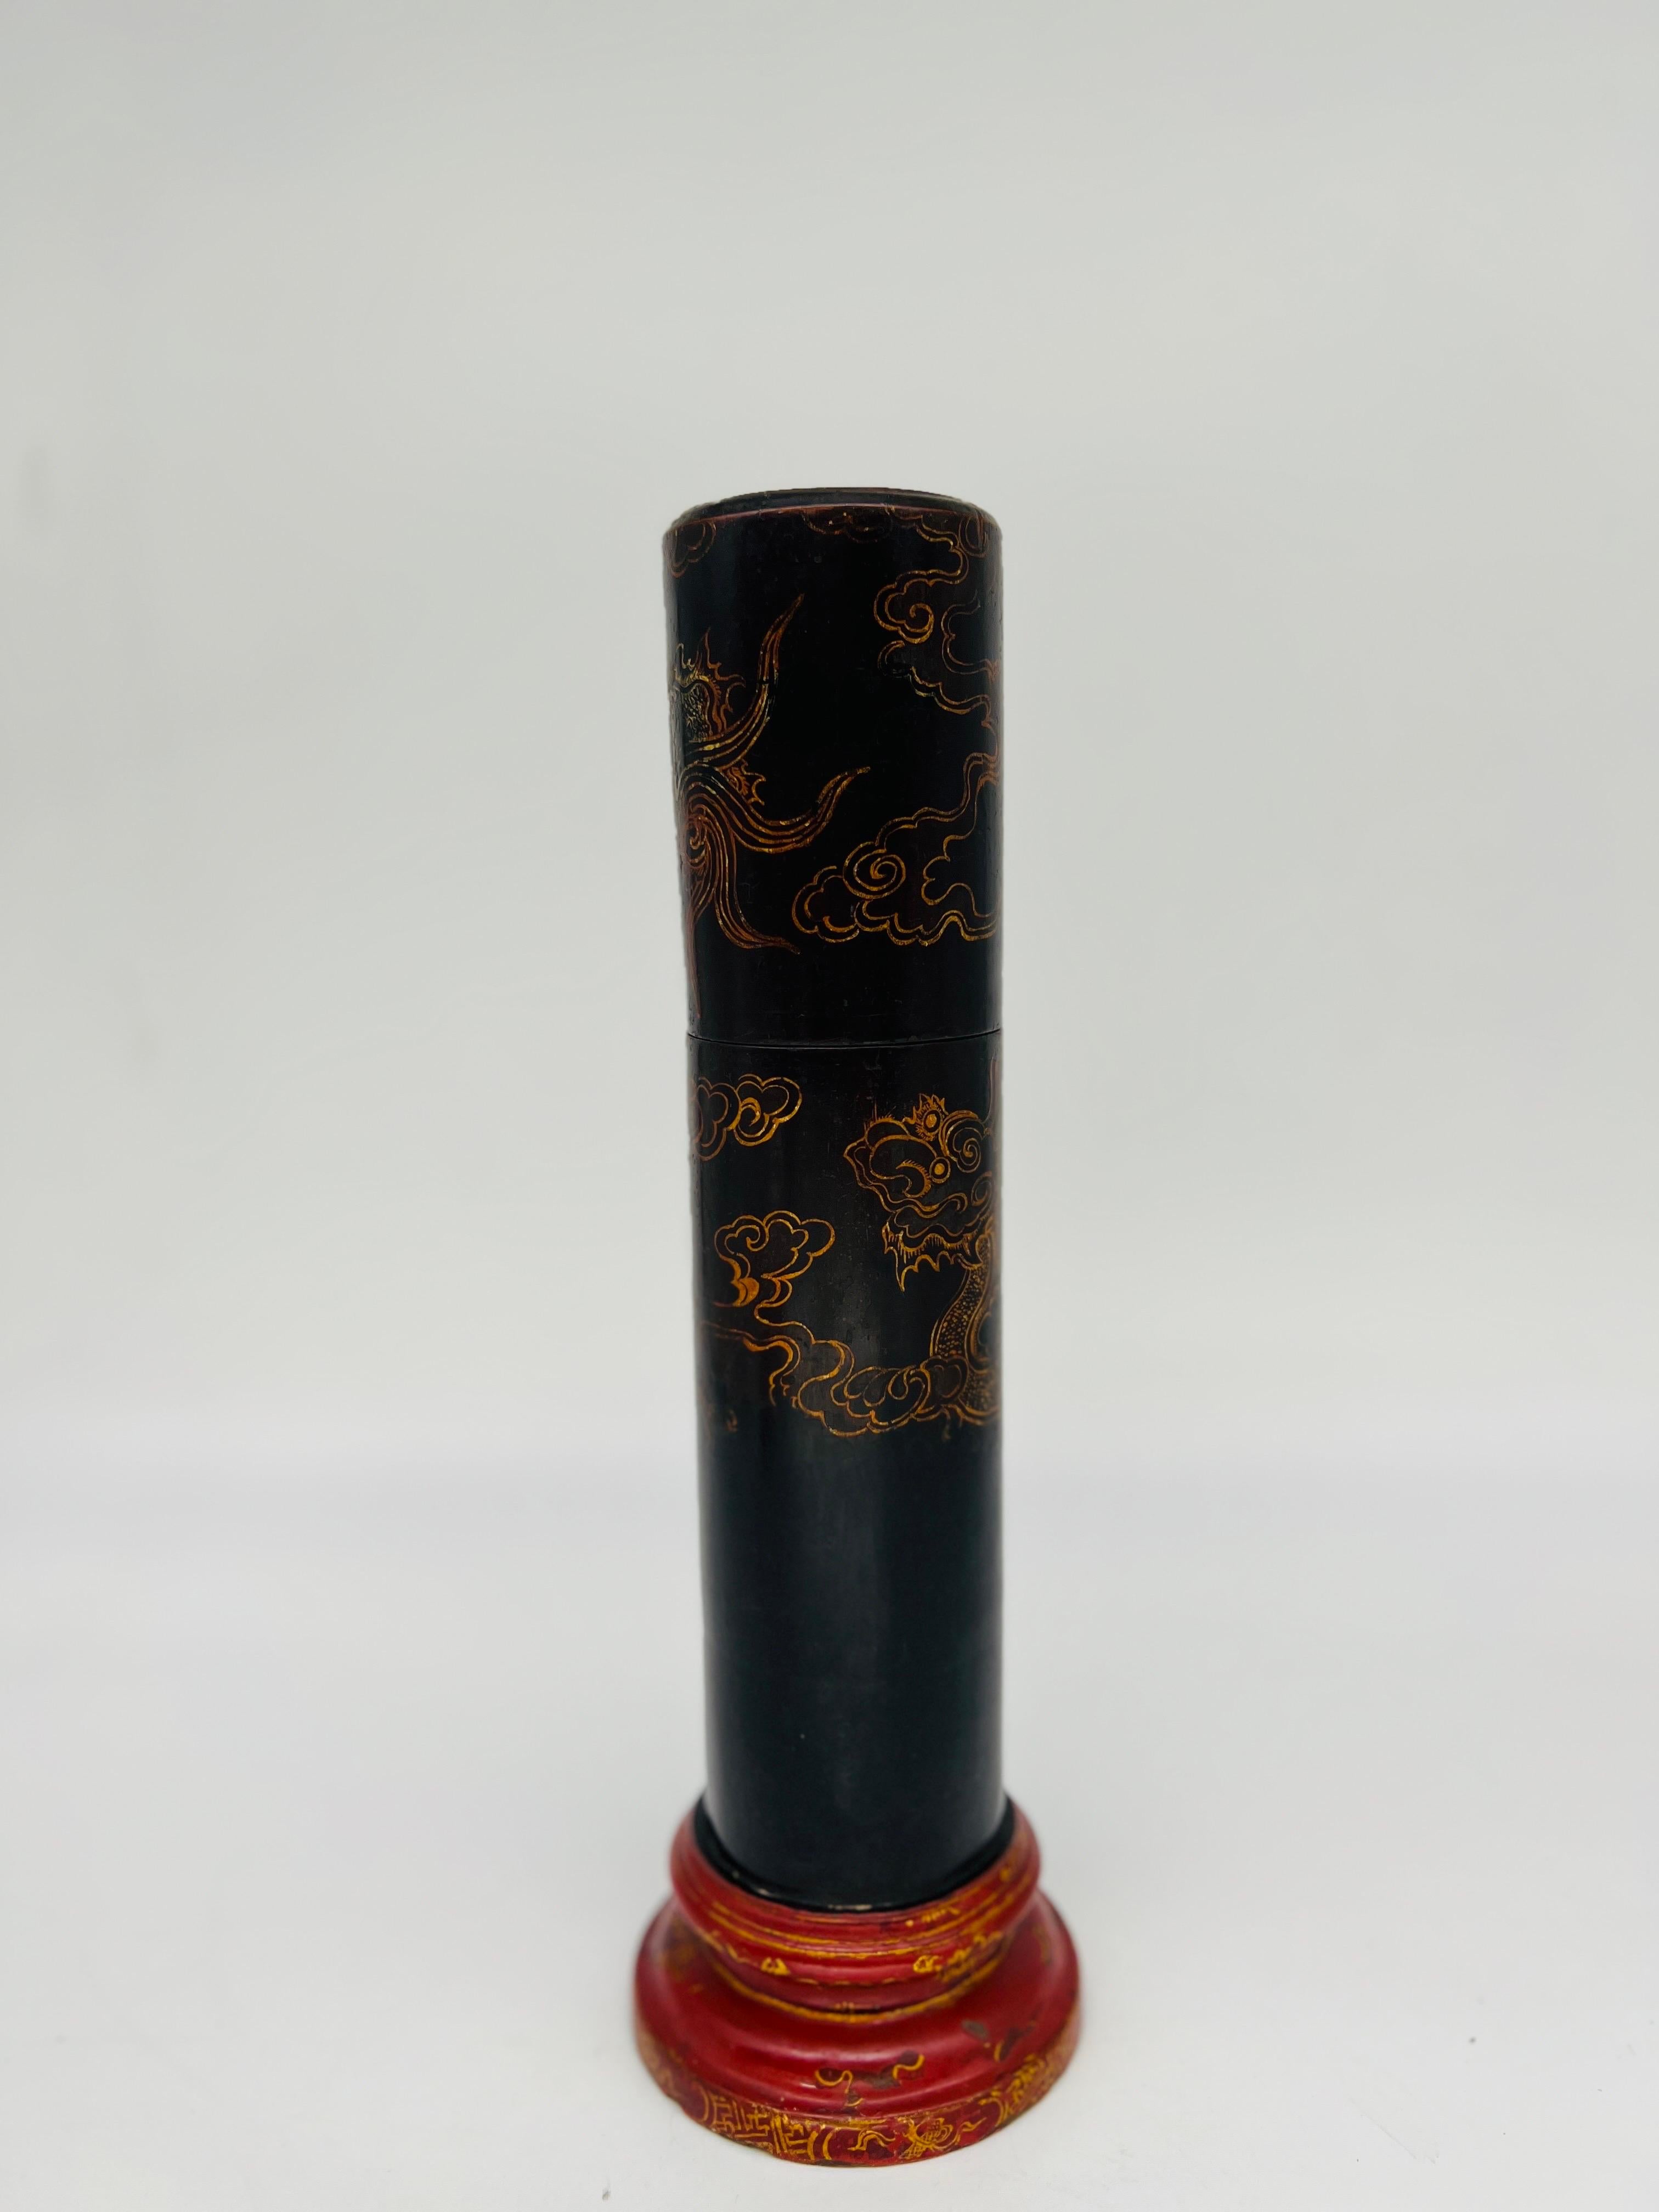 Vintage Japanese Lacquerware Cylindrical Fireplace Matchstrike Box For Sale 5